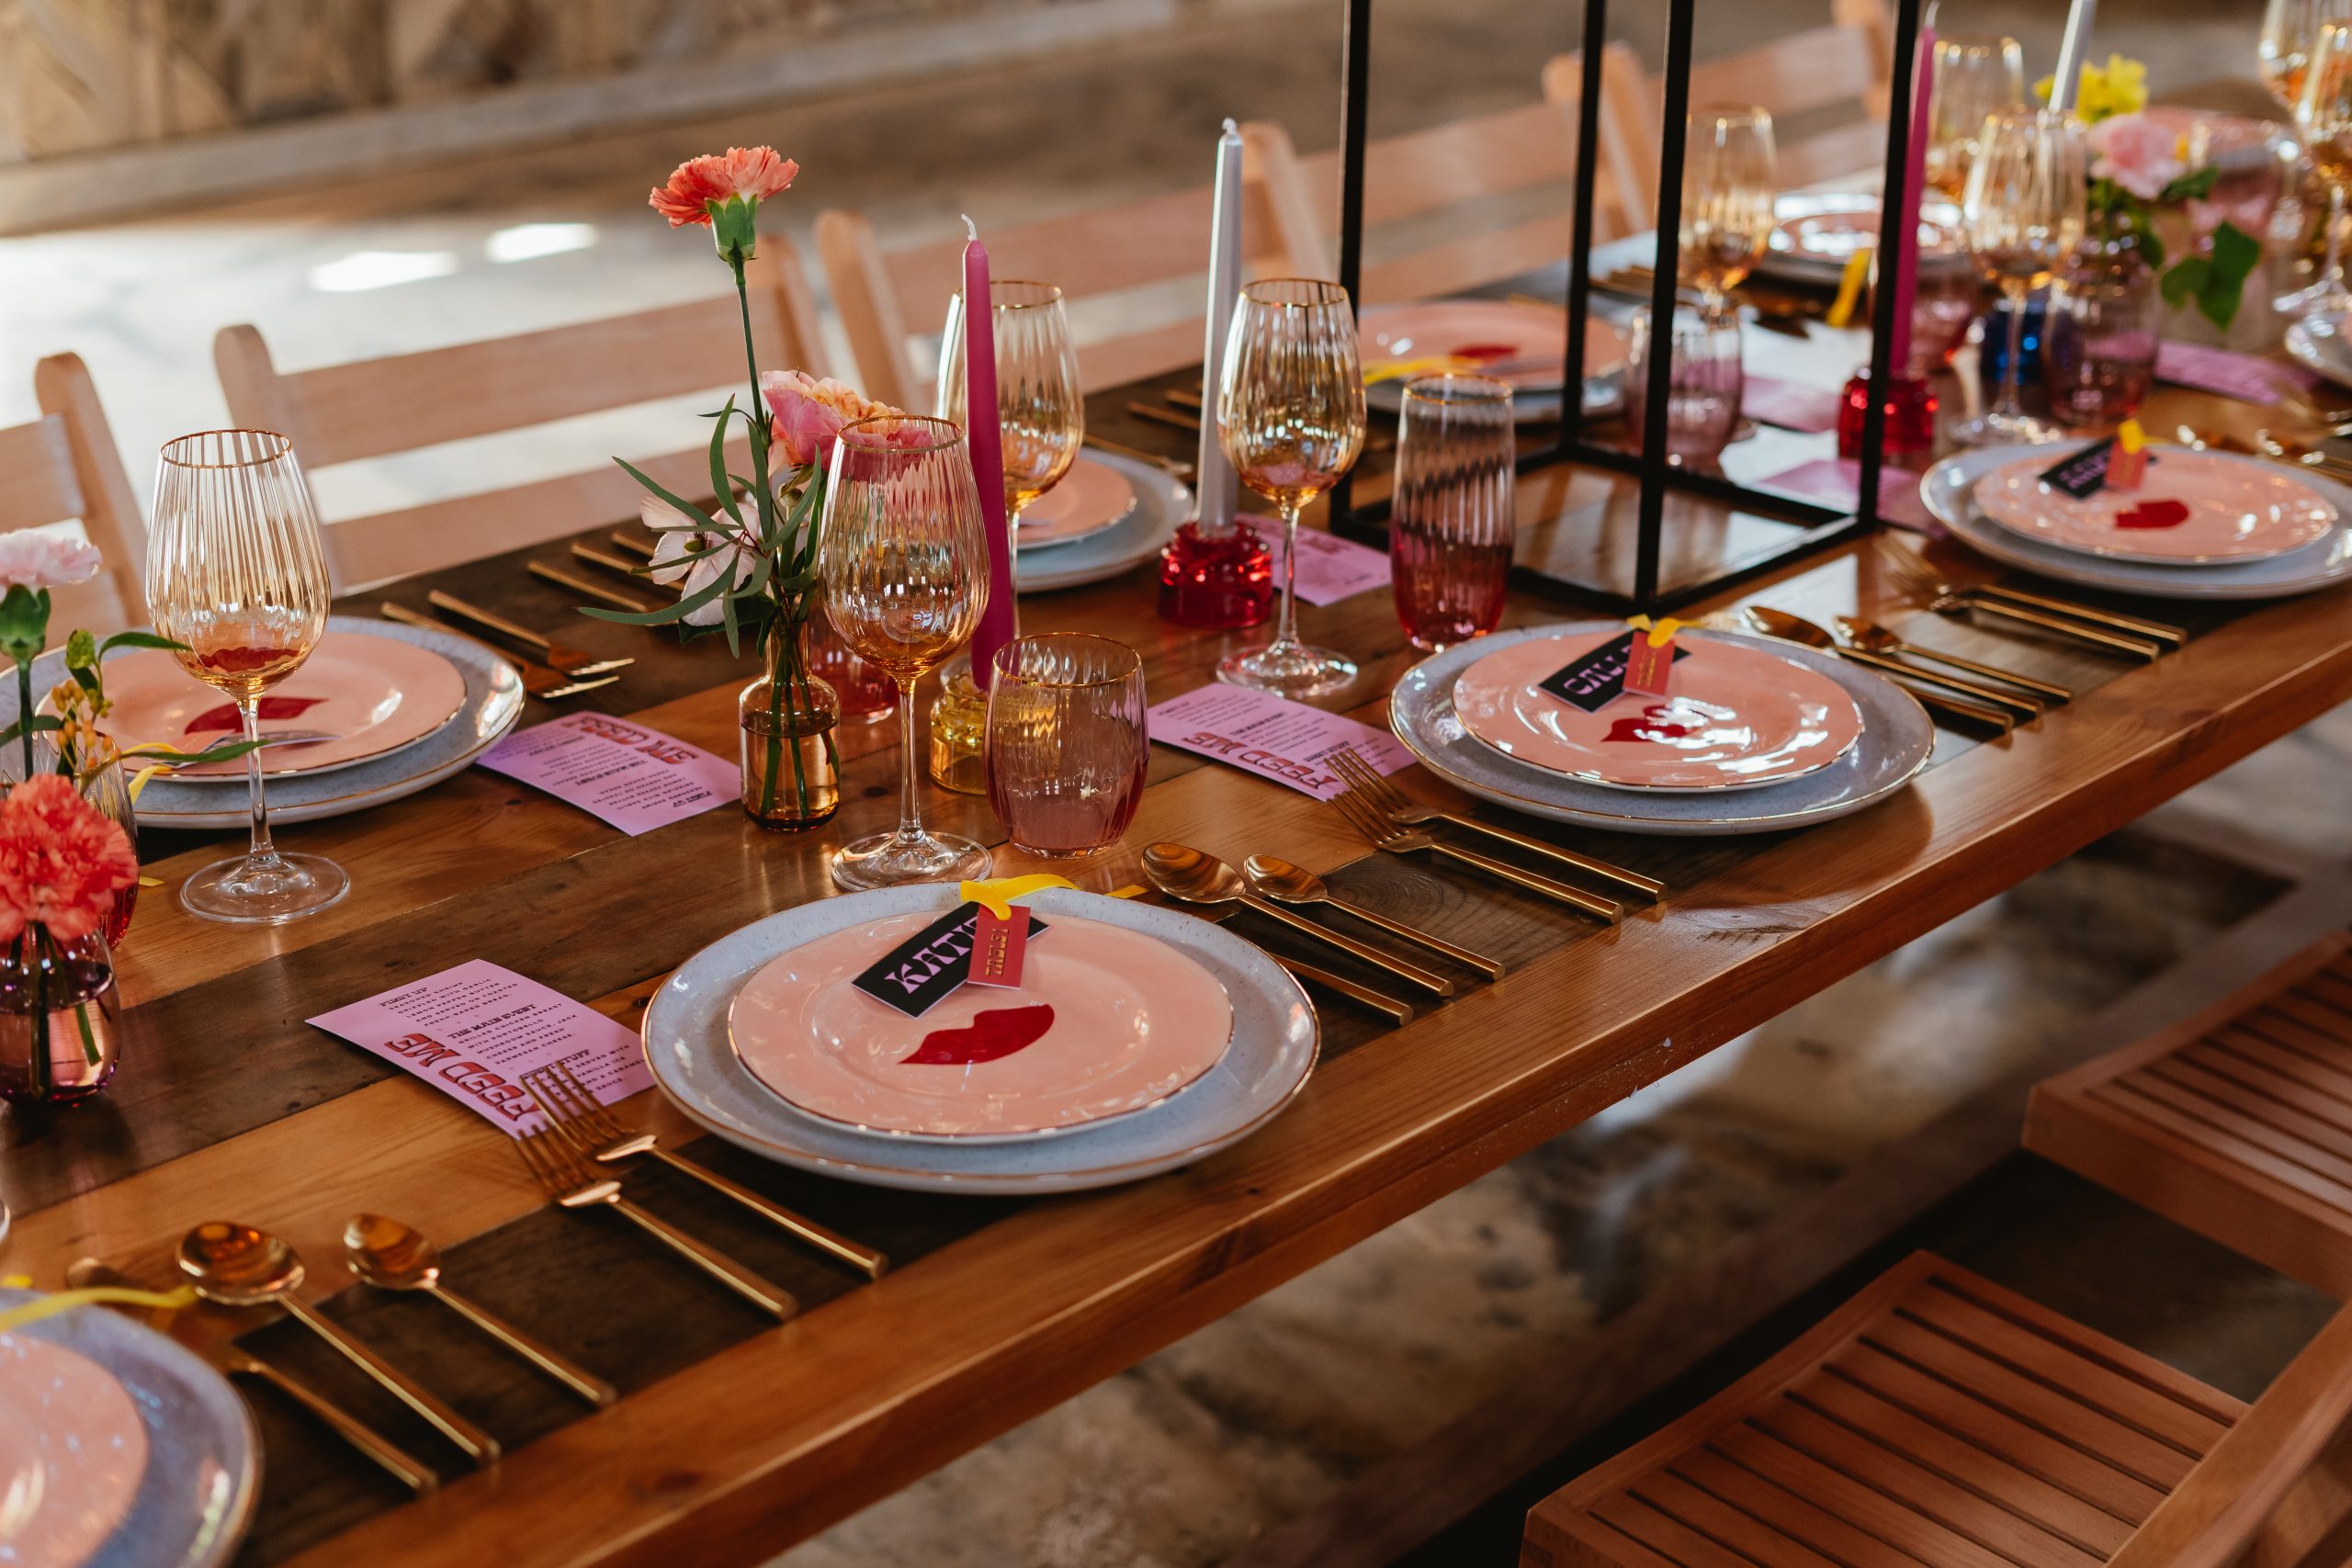 A wedding table at The Canary Shed of colours and alternative decorations: plates, cutlery, glasses, flowers